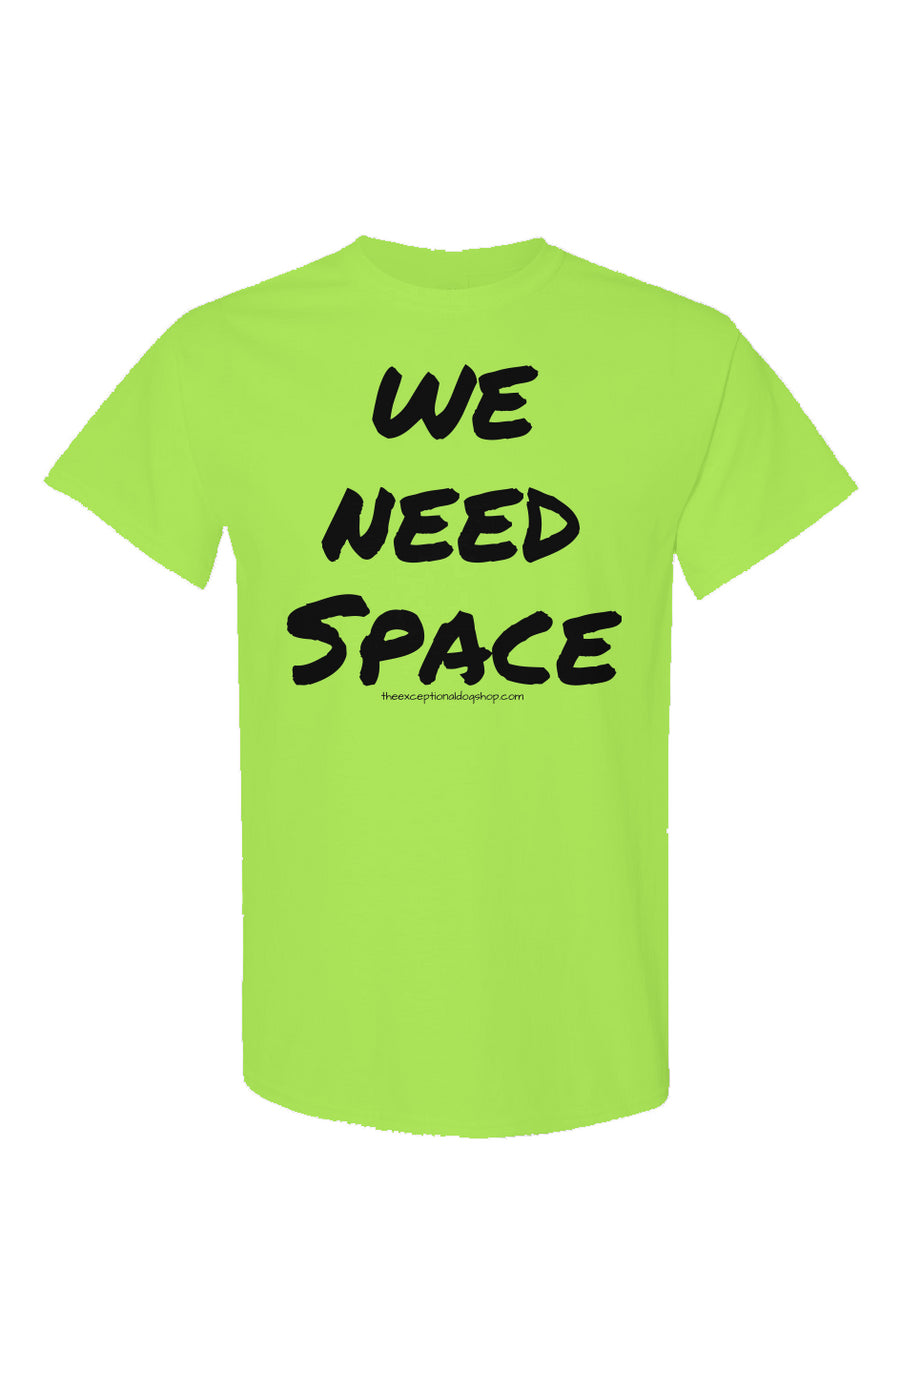 High visibility neon yellow training t shirt with the text we need space in large lettering on the front of the shirt.